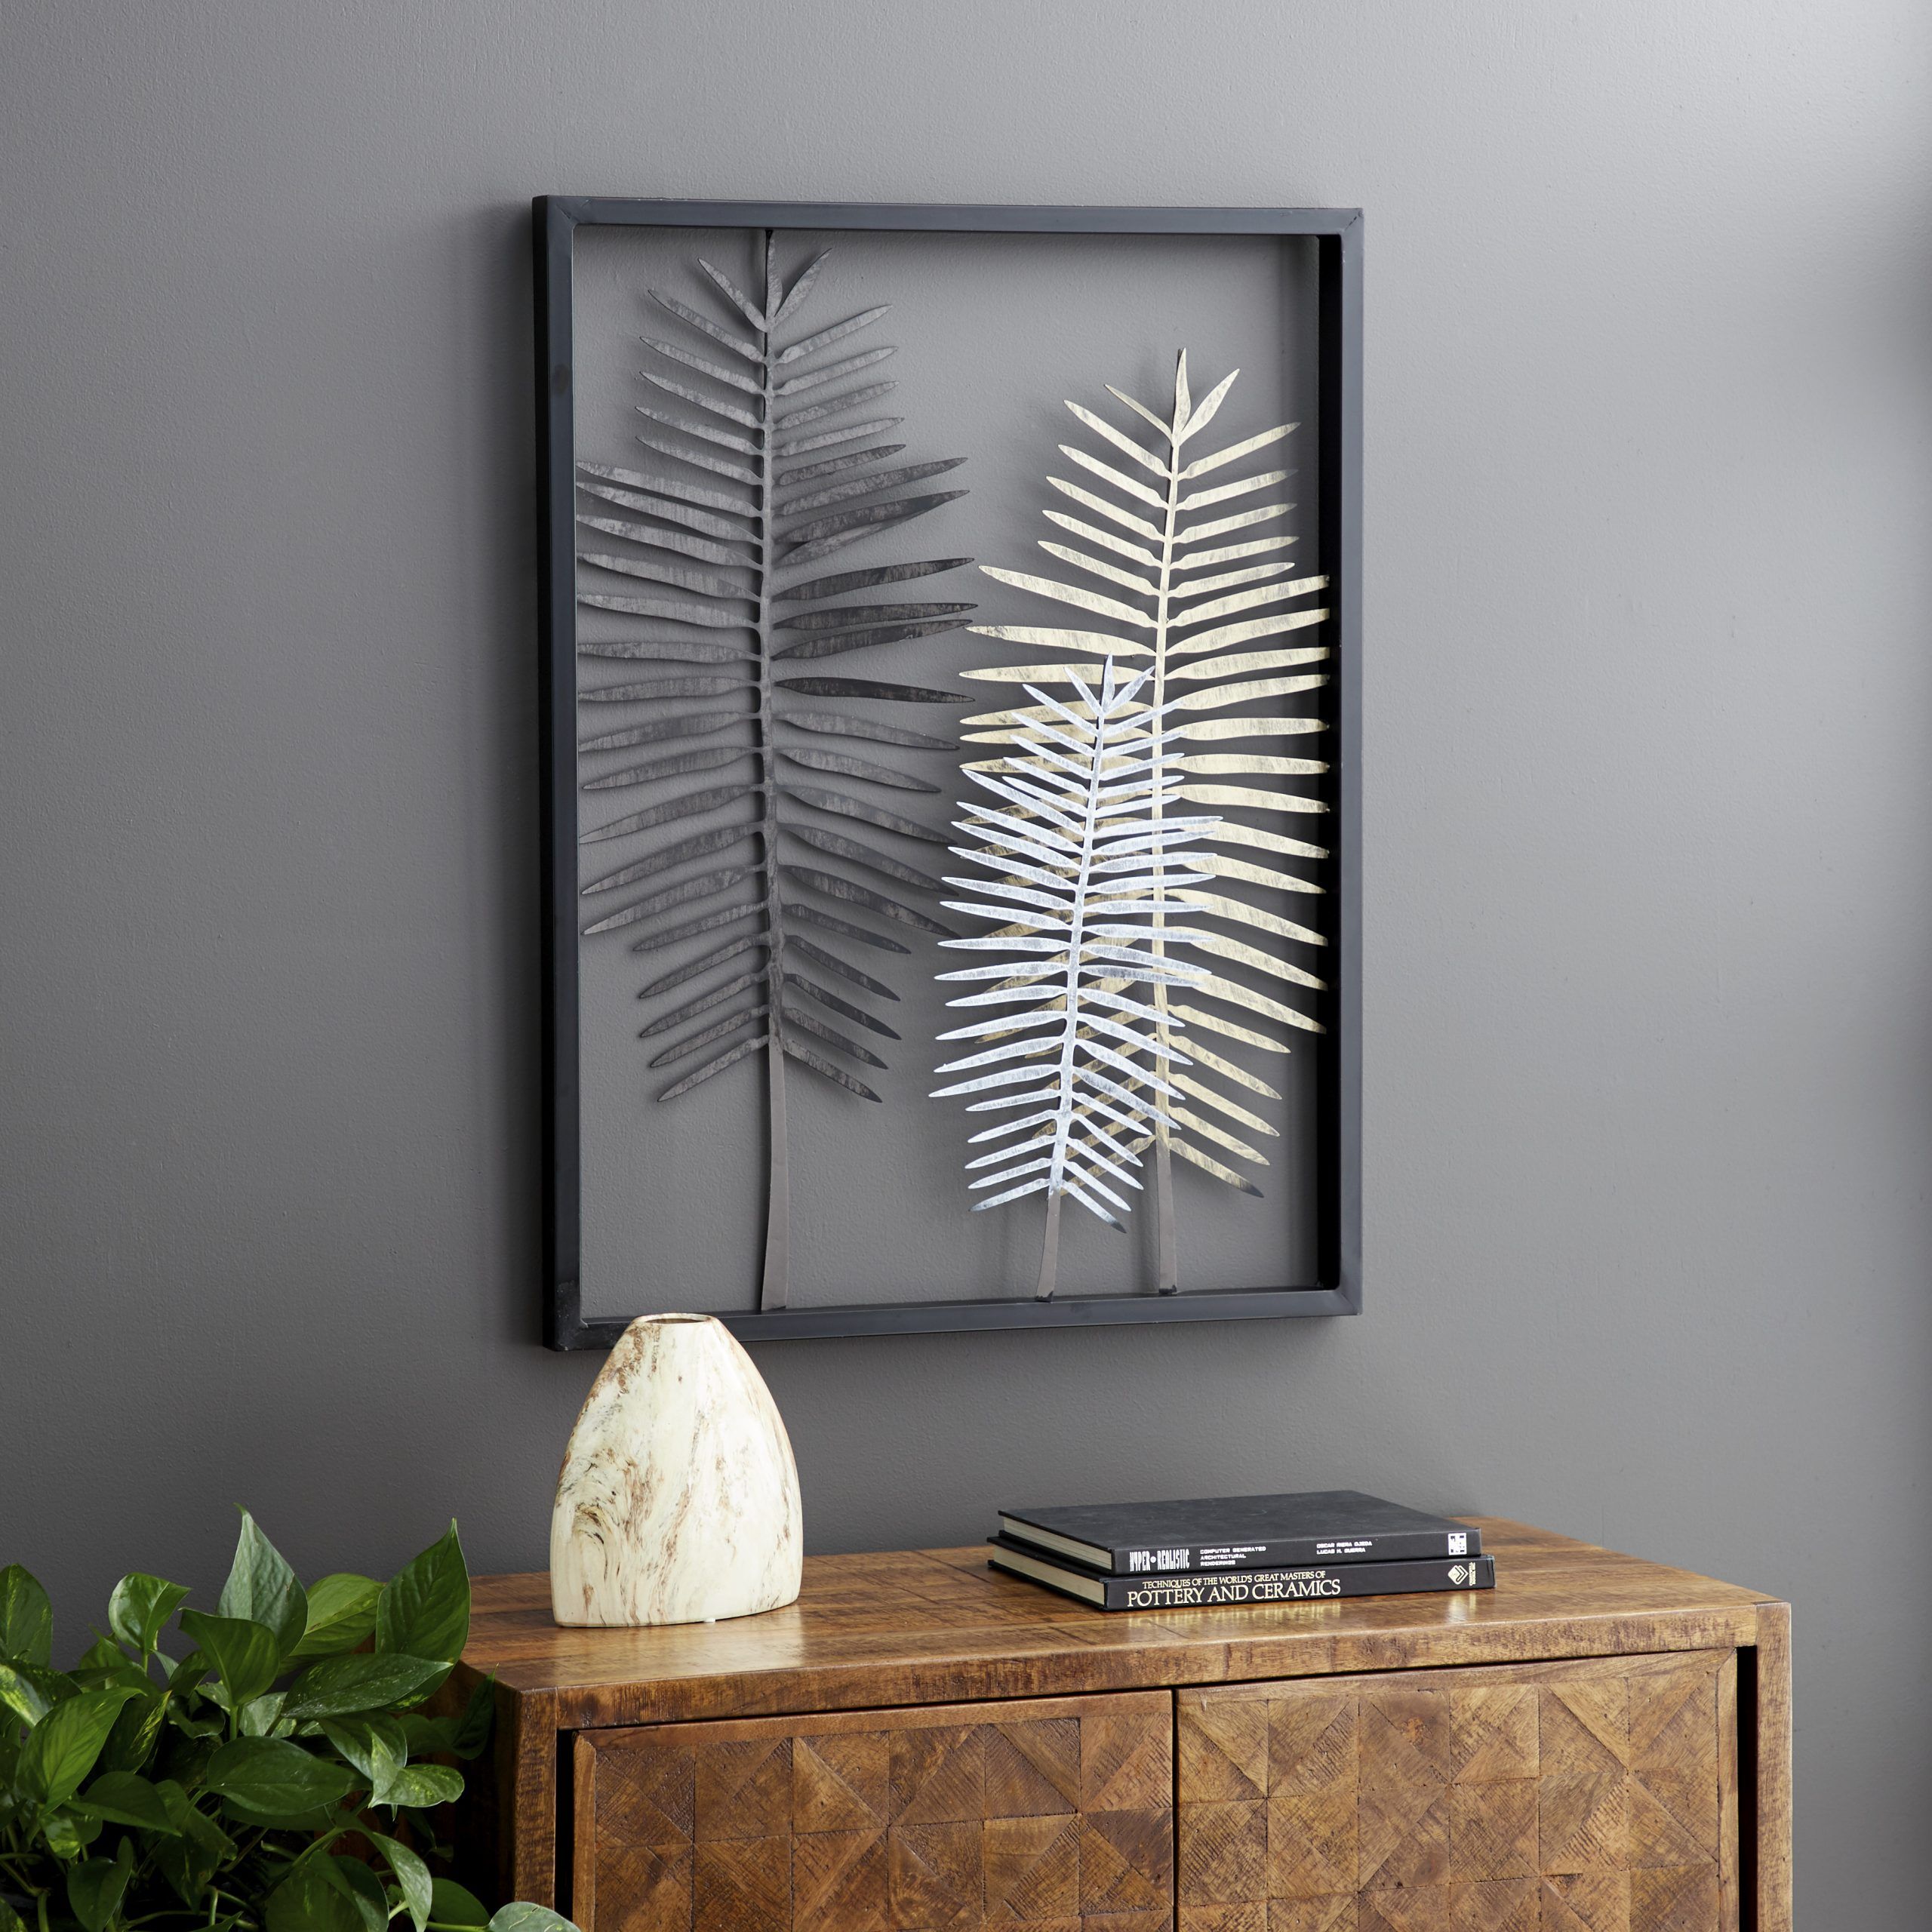 Decmode – 3d Gold, Silver, And Black Metal Fern Wall Art, 25" X 33 With Regard To 2017 Gold And Silver Metal Wall Art (View 5 of 20)